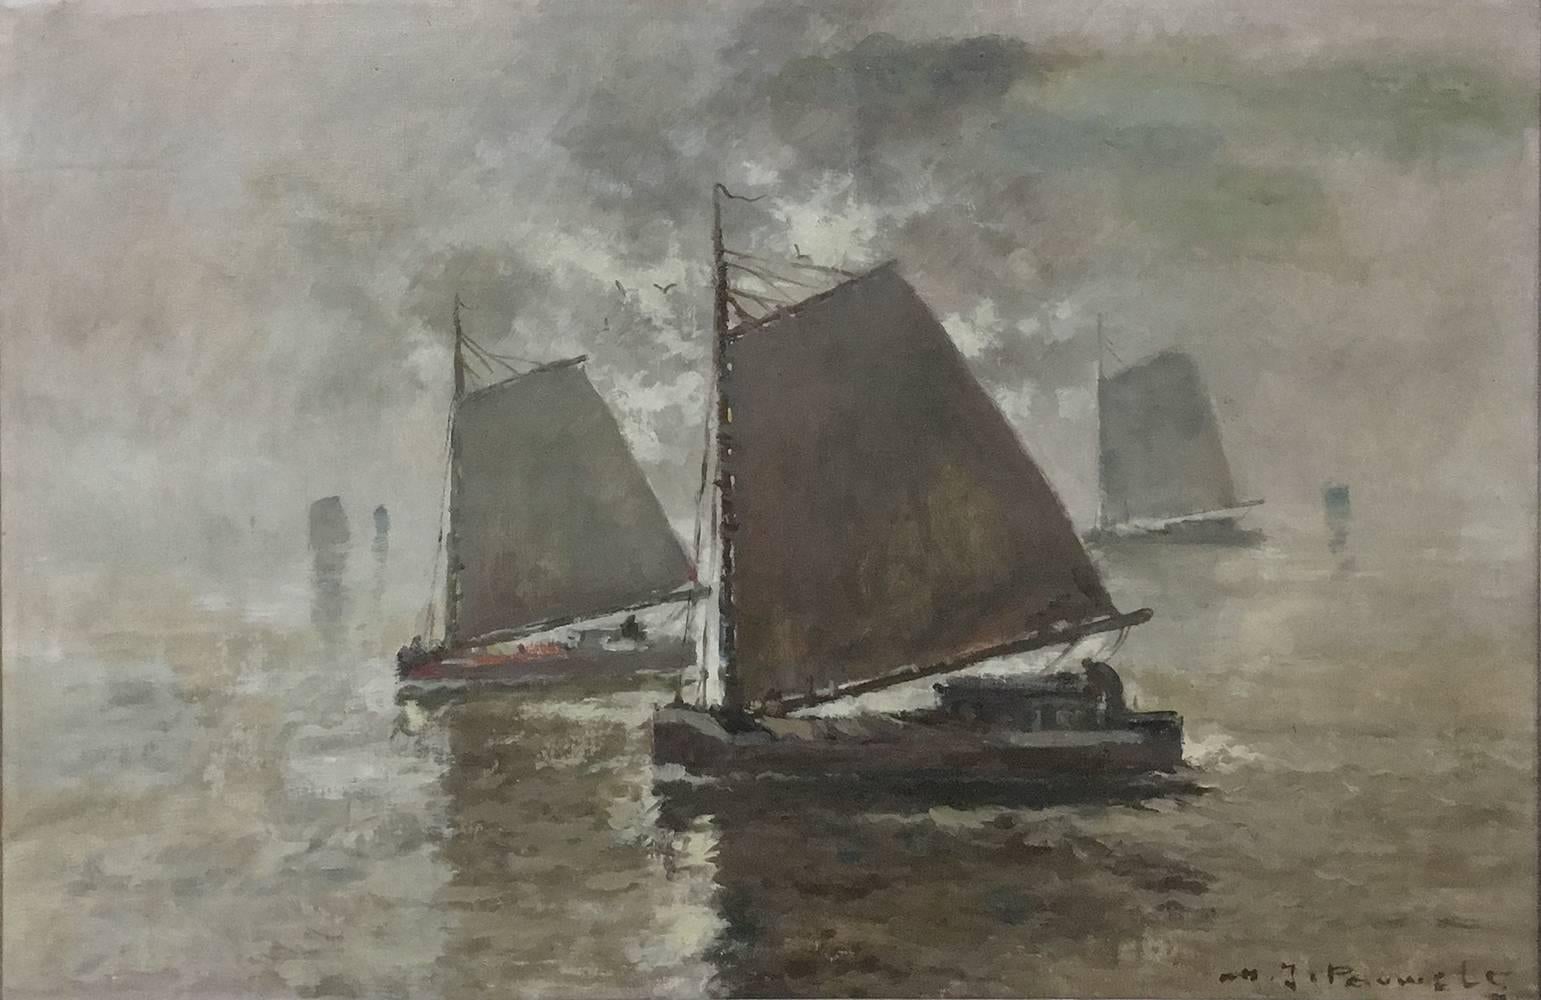 Antique framed oil painting on canvas by Henri Joseph Pauwels (1903-1983) is a wonderful impressionistic nautical scene depicting the fishing fleet headed out for the day just as the fog is lifting. Such scenes have been repeated countless times